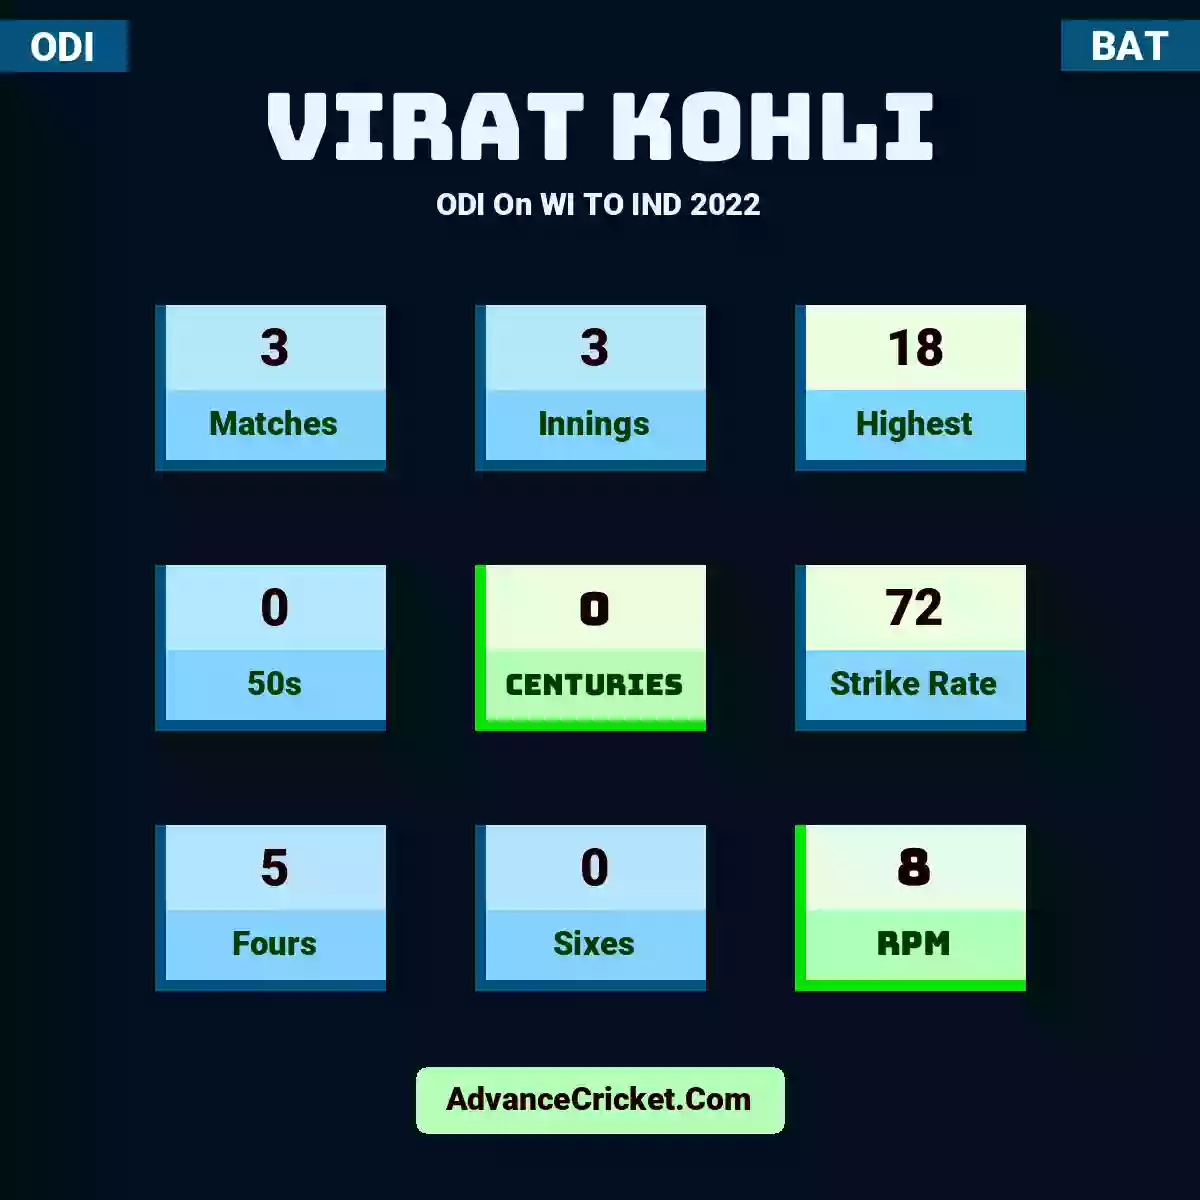 Virat Kohli ODI  On WI TO IND 2022, Virat Kohli played 3 matches, scored 18 runs as highest, 0 half-centuries, and 0 centuries, with a strike rate of 72. V.Kohli hit 5 fours and 0 sixes, with an RPM of 8.